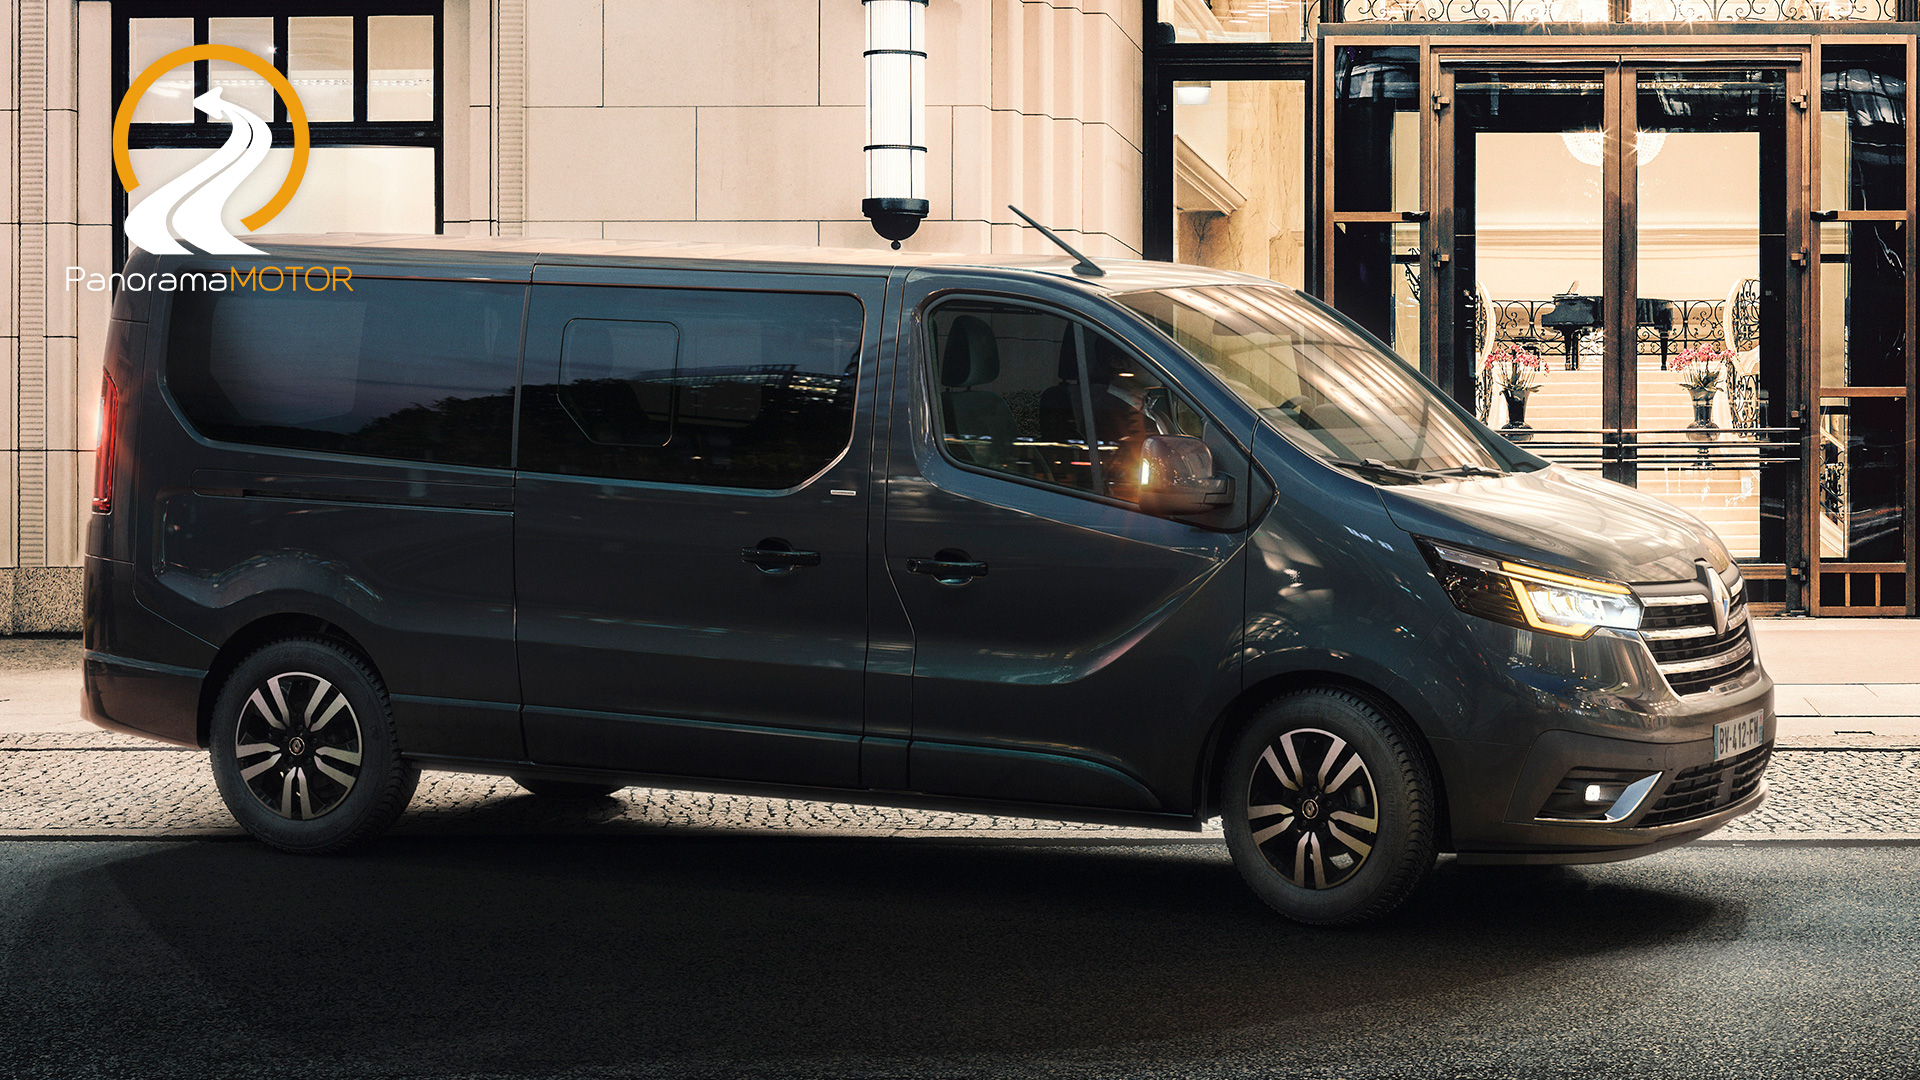 Renault Trafic SpaceClass 2021